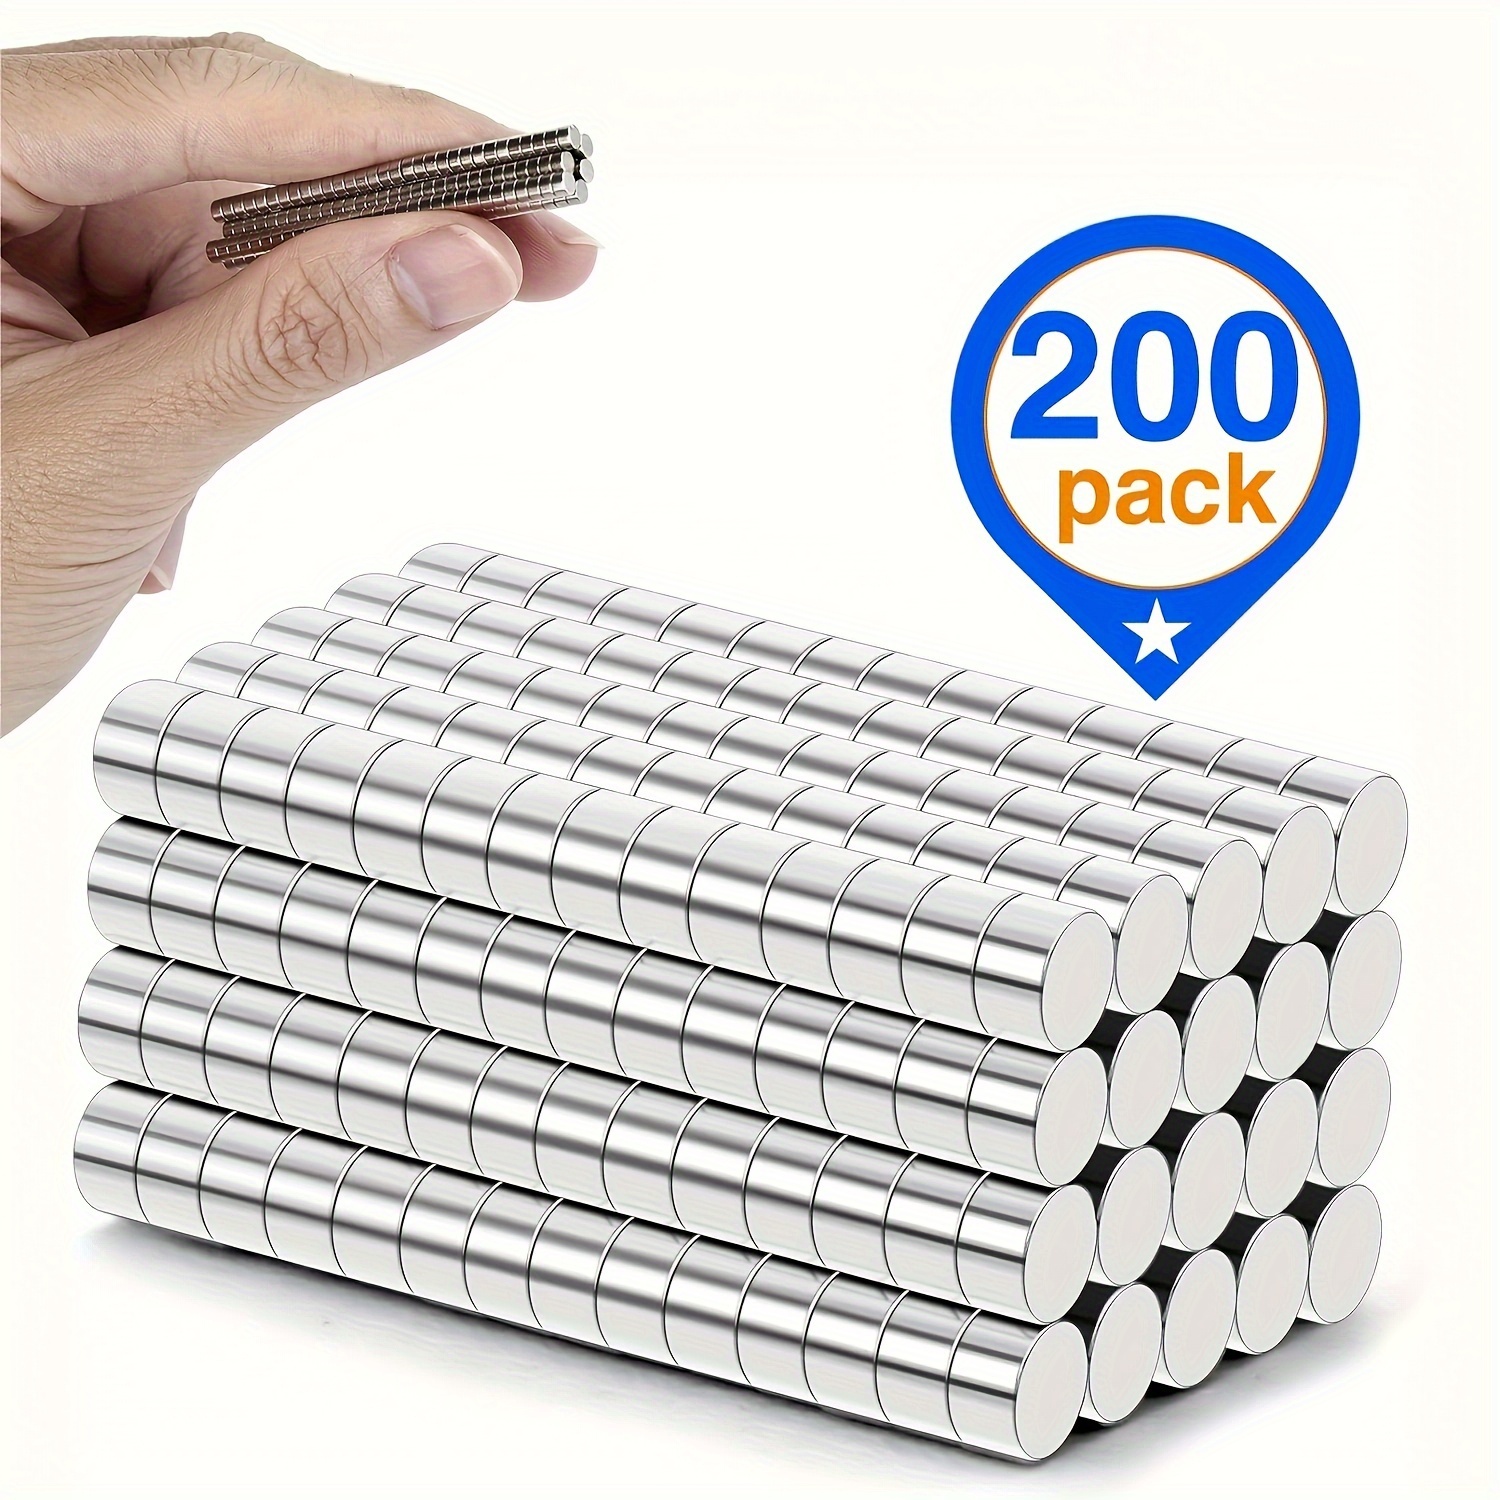 

Value Pack 200pcs 3x2mm Ndfeb Rare Earth Magnets, Round Magnets Permanent Neodymium Magnets, N35 Super Strong Magnet Disc